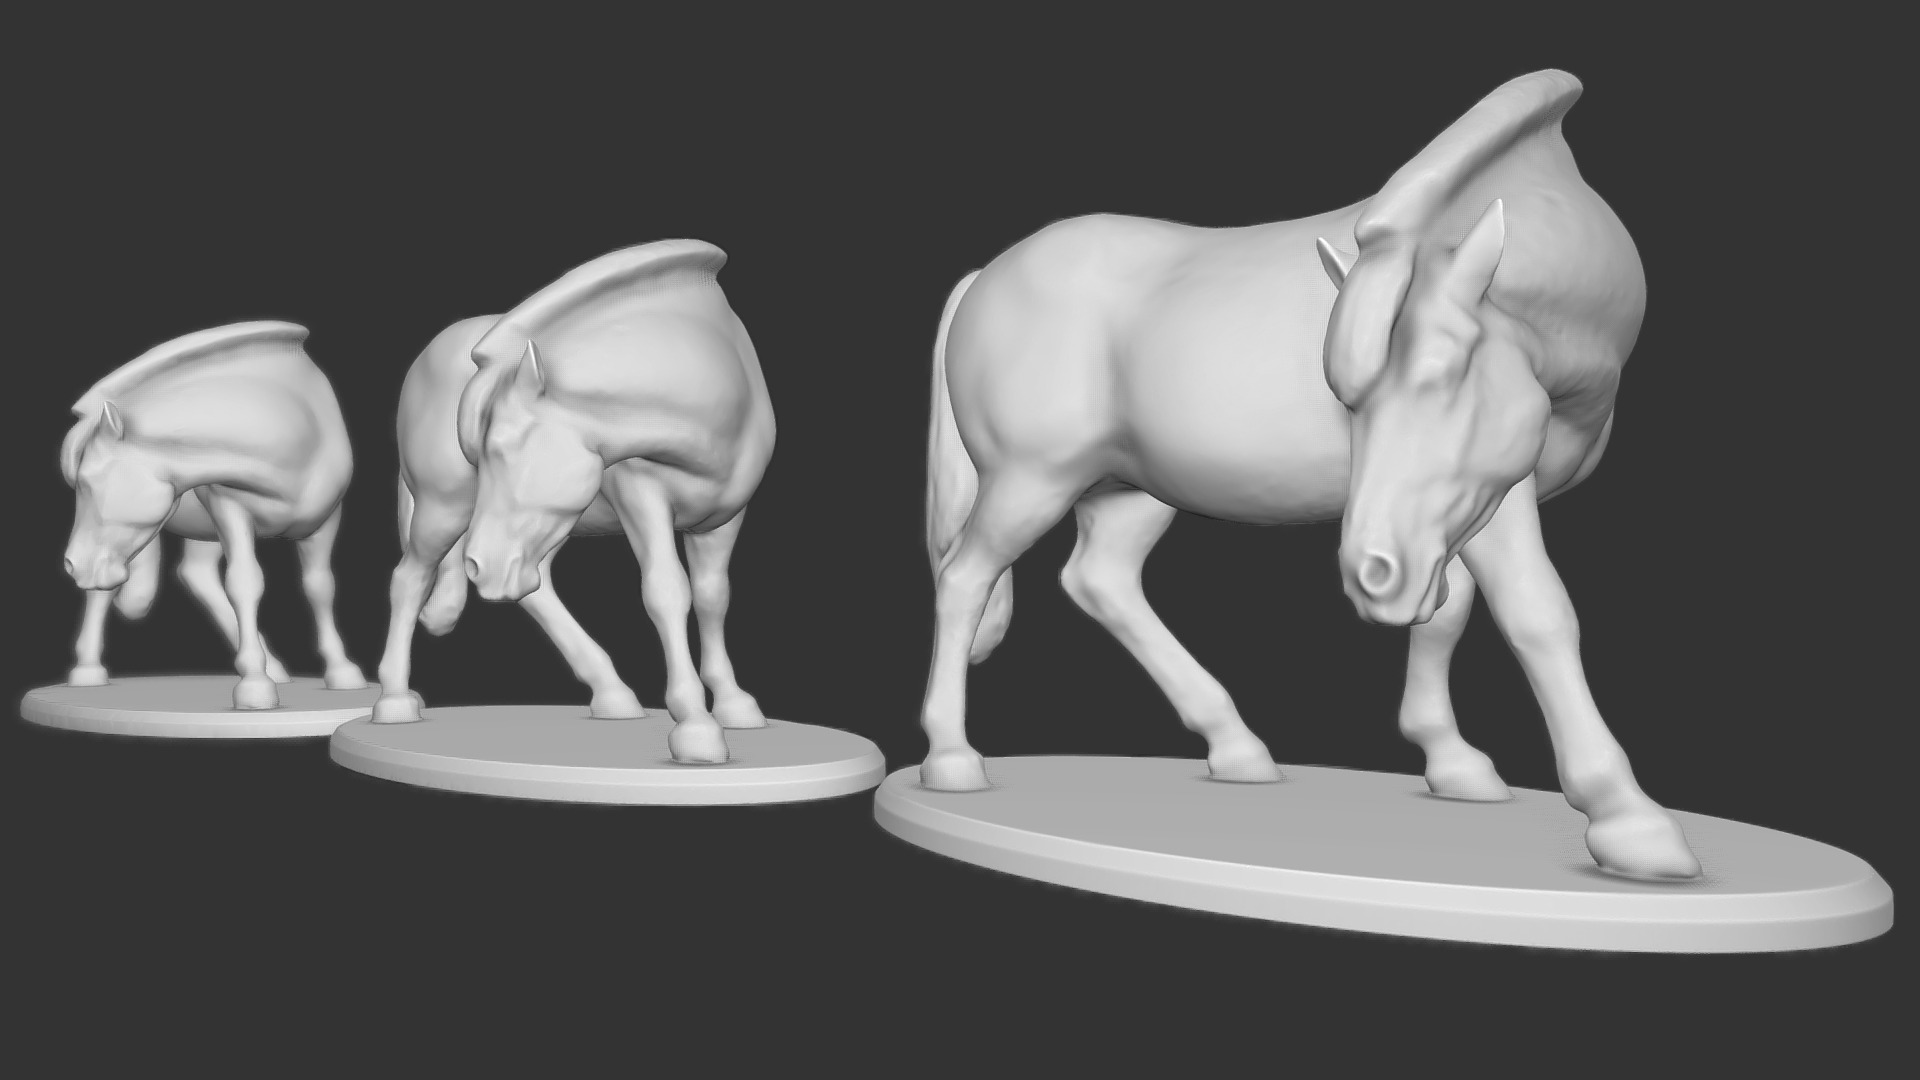 3D model Horse Figurine – 3D Printable - This is a 3D model of the Horse Figurine - 3D Printable. The 3D model is about a group of white figurines.